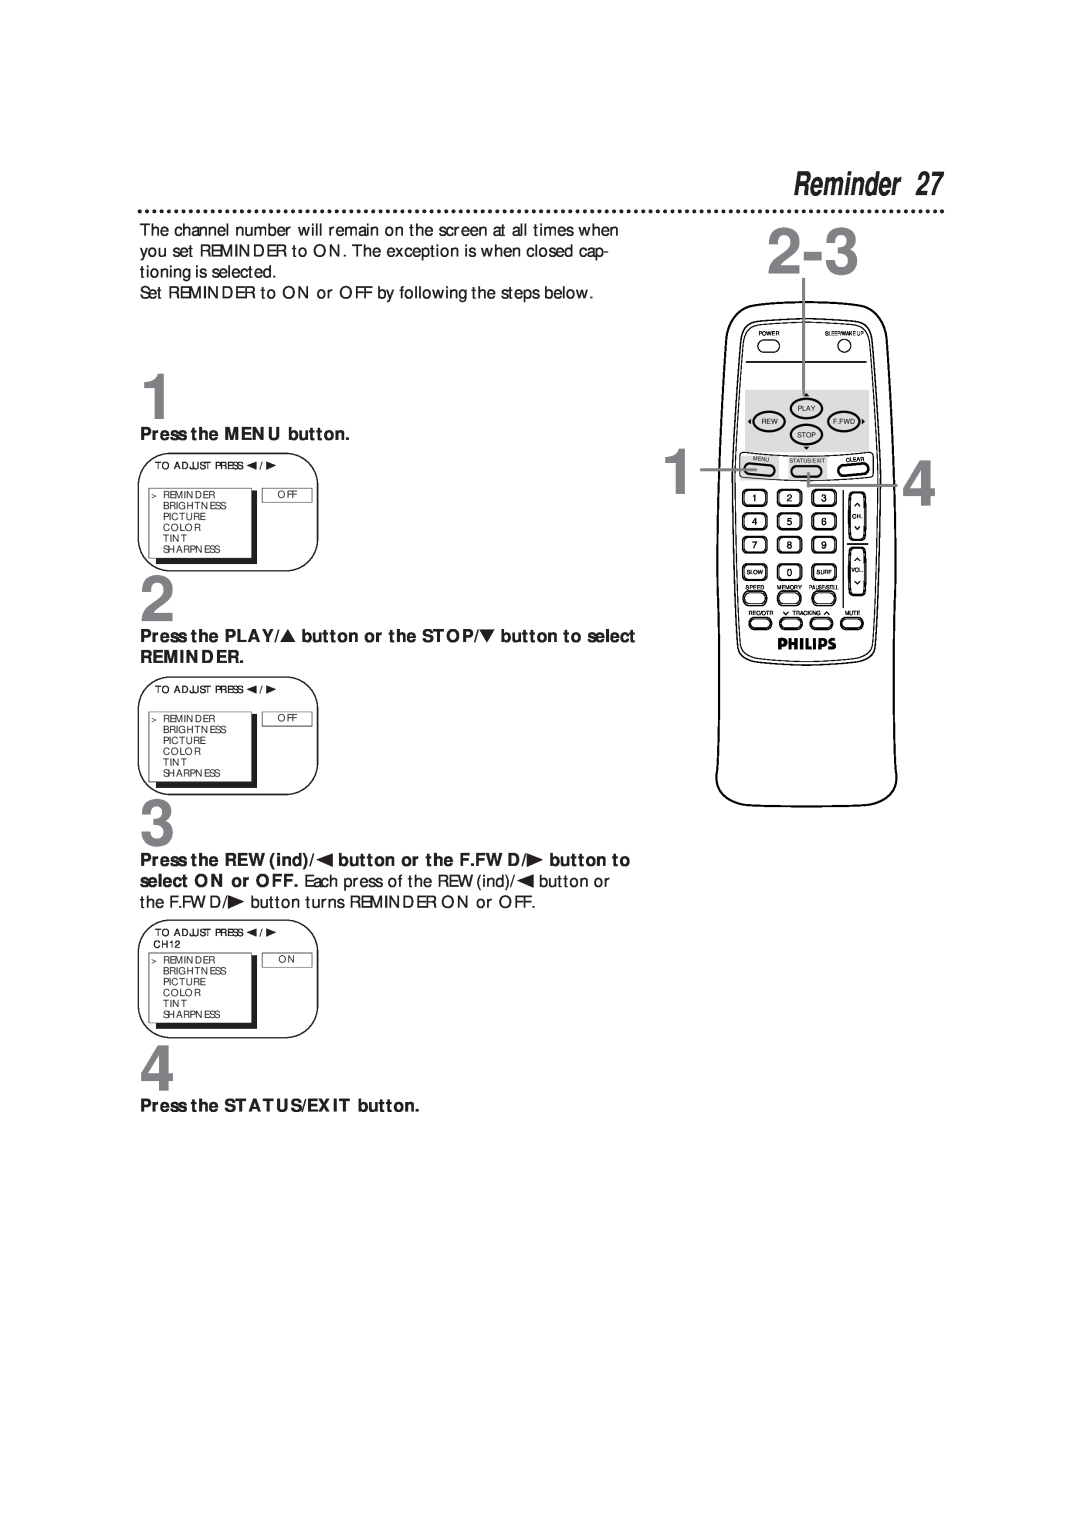 Magnavox CCB193AT owner manual Reminder, Set REMINDER to ON or OFF by following the steps below 